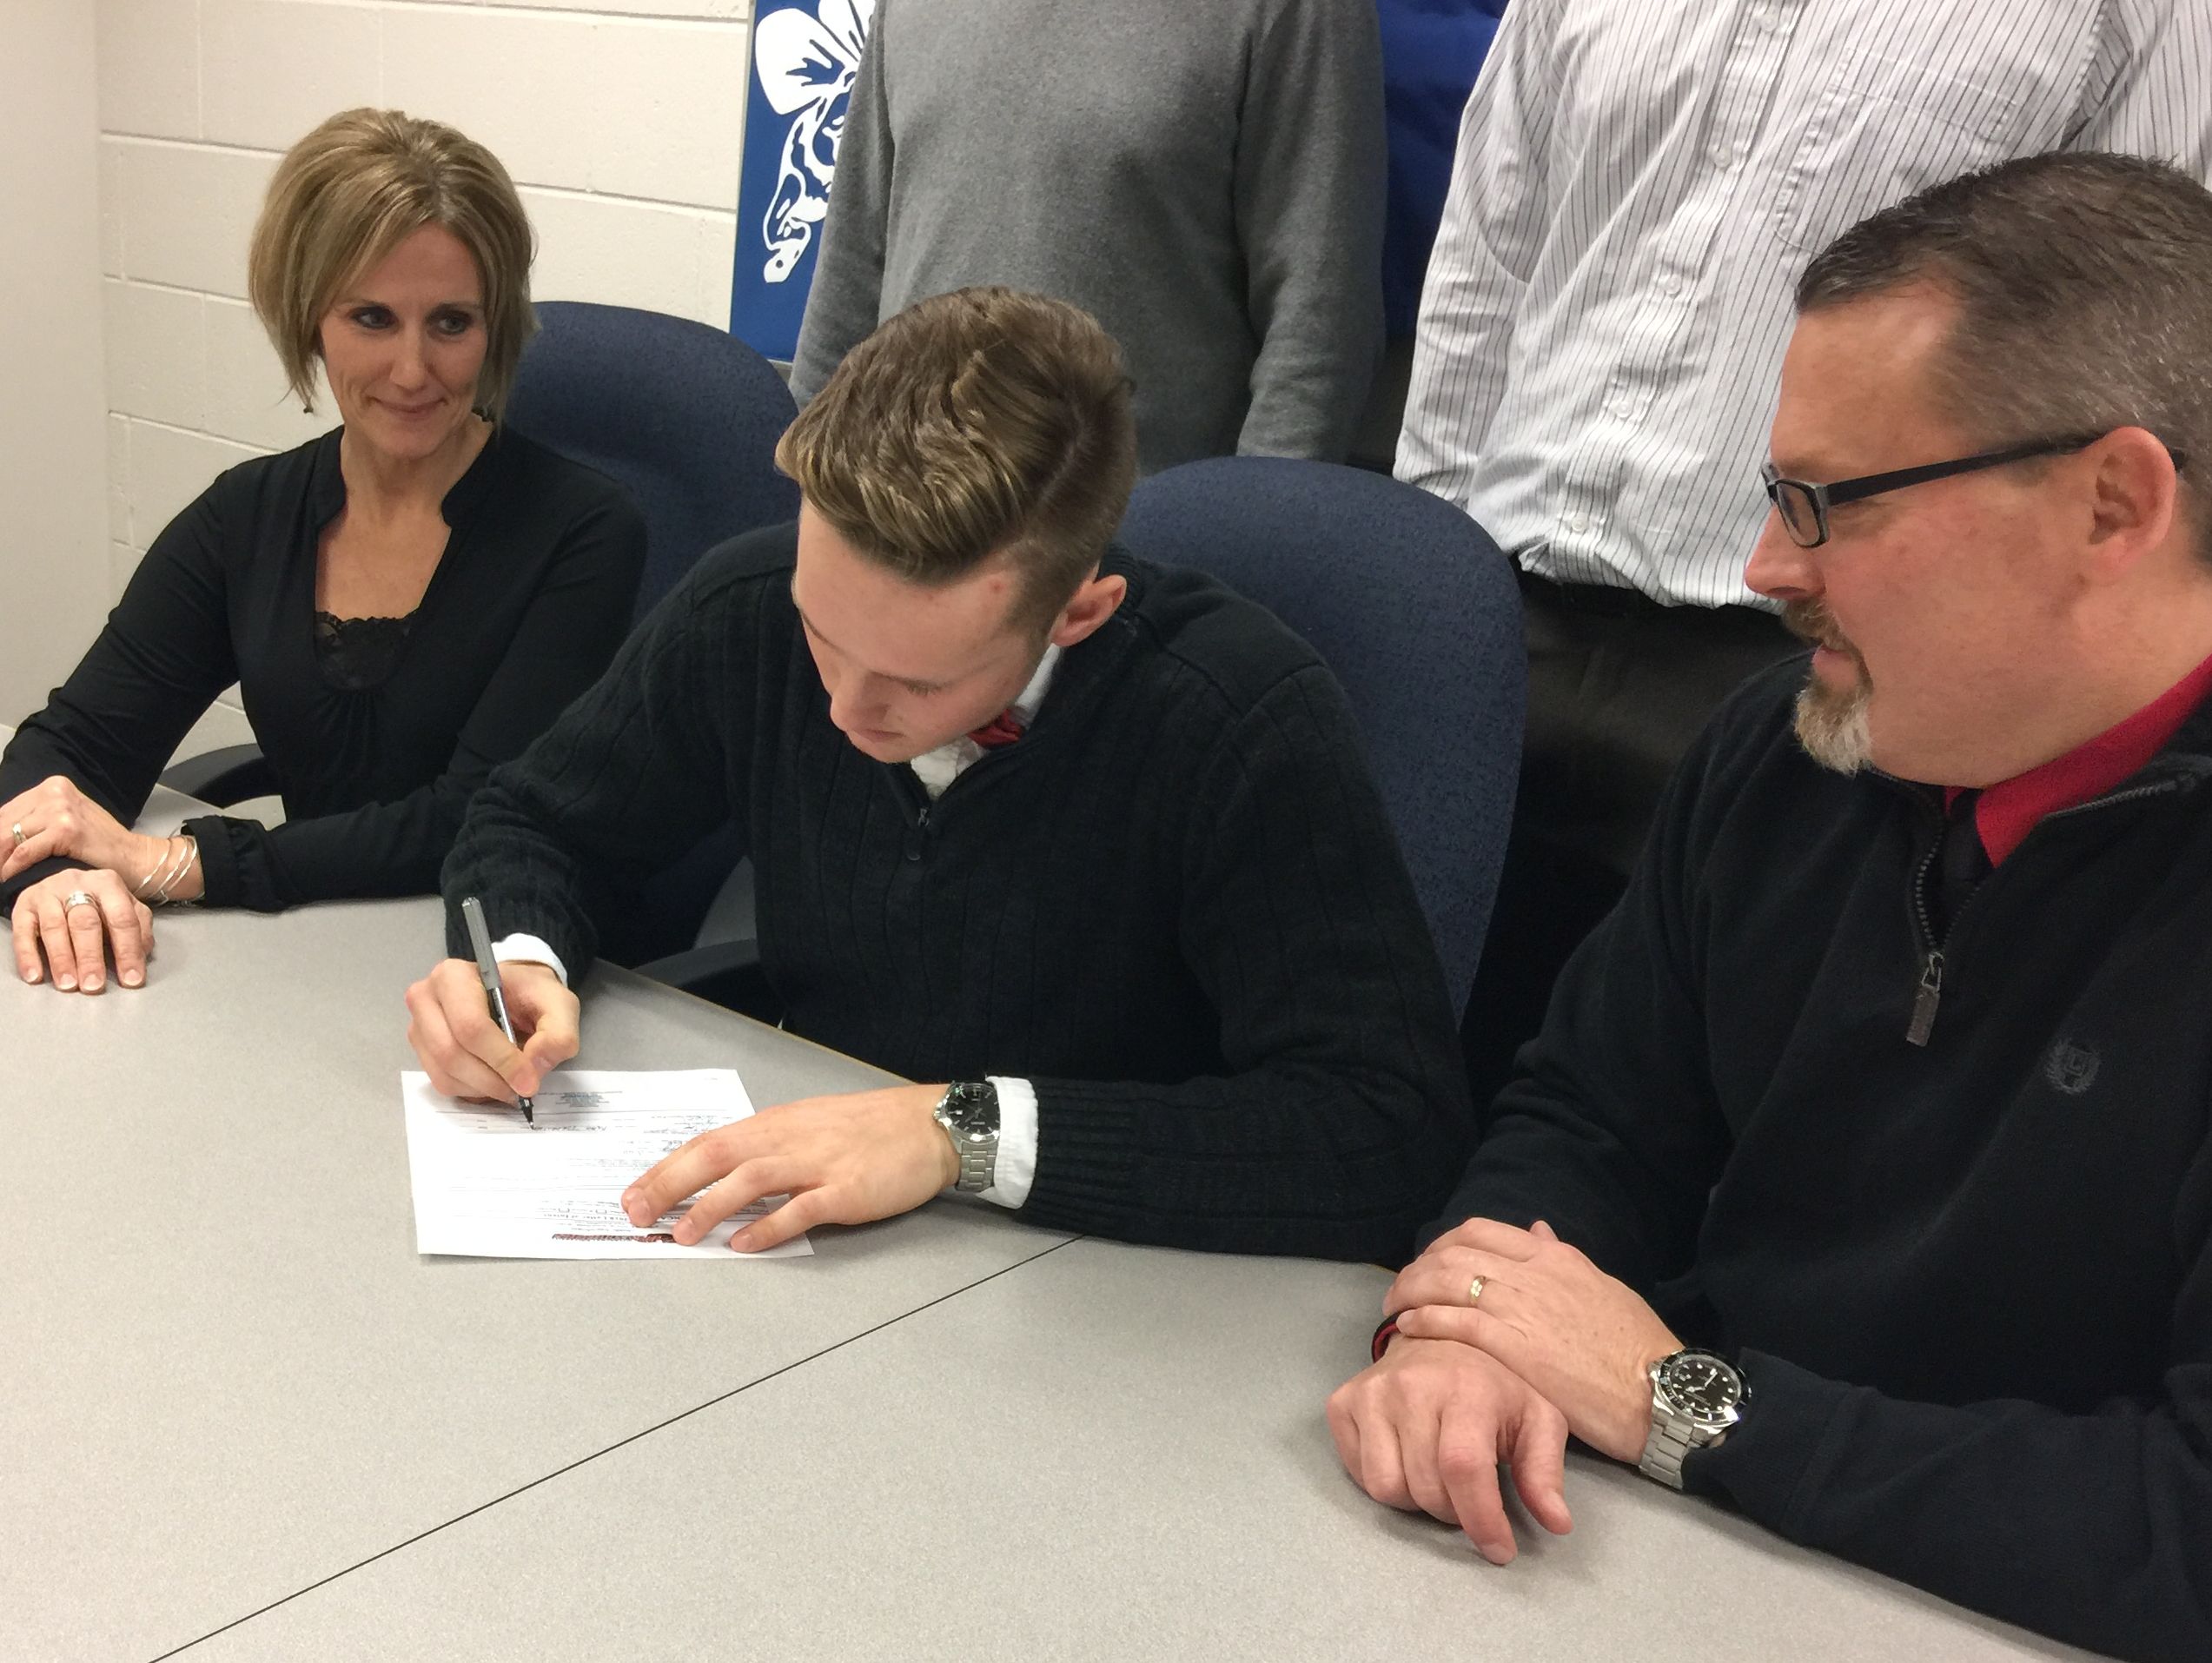 Flanked by his parents, Bath senior Max Tiraboschi, center, signs his national letter of intent to play football at Davenport University on Wednesday, Feb. 1, 2017